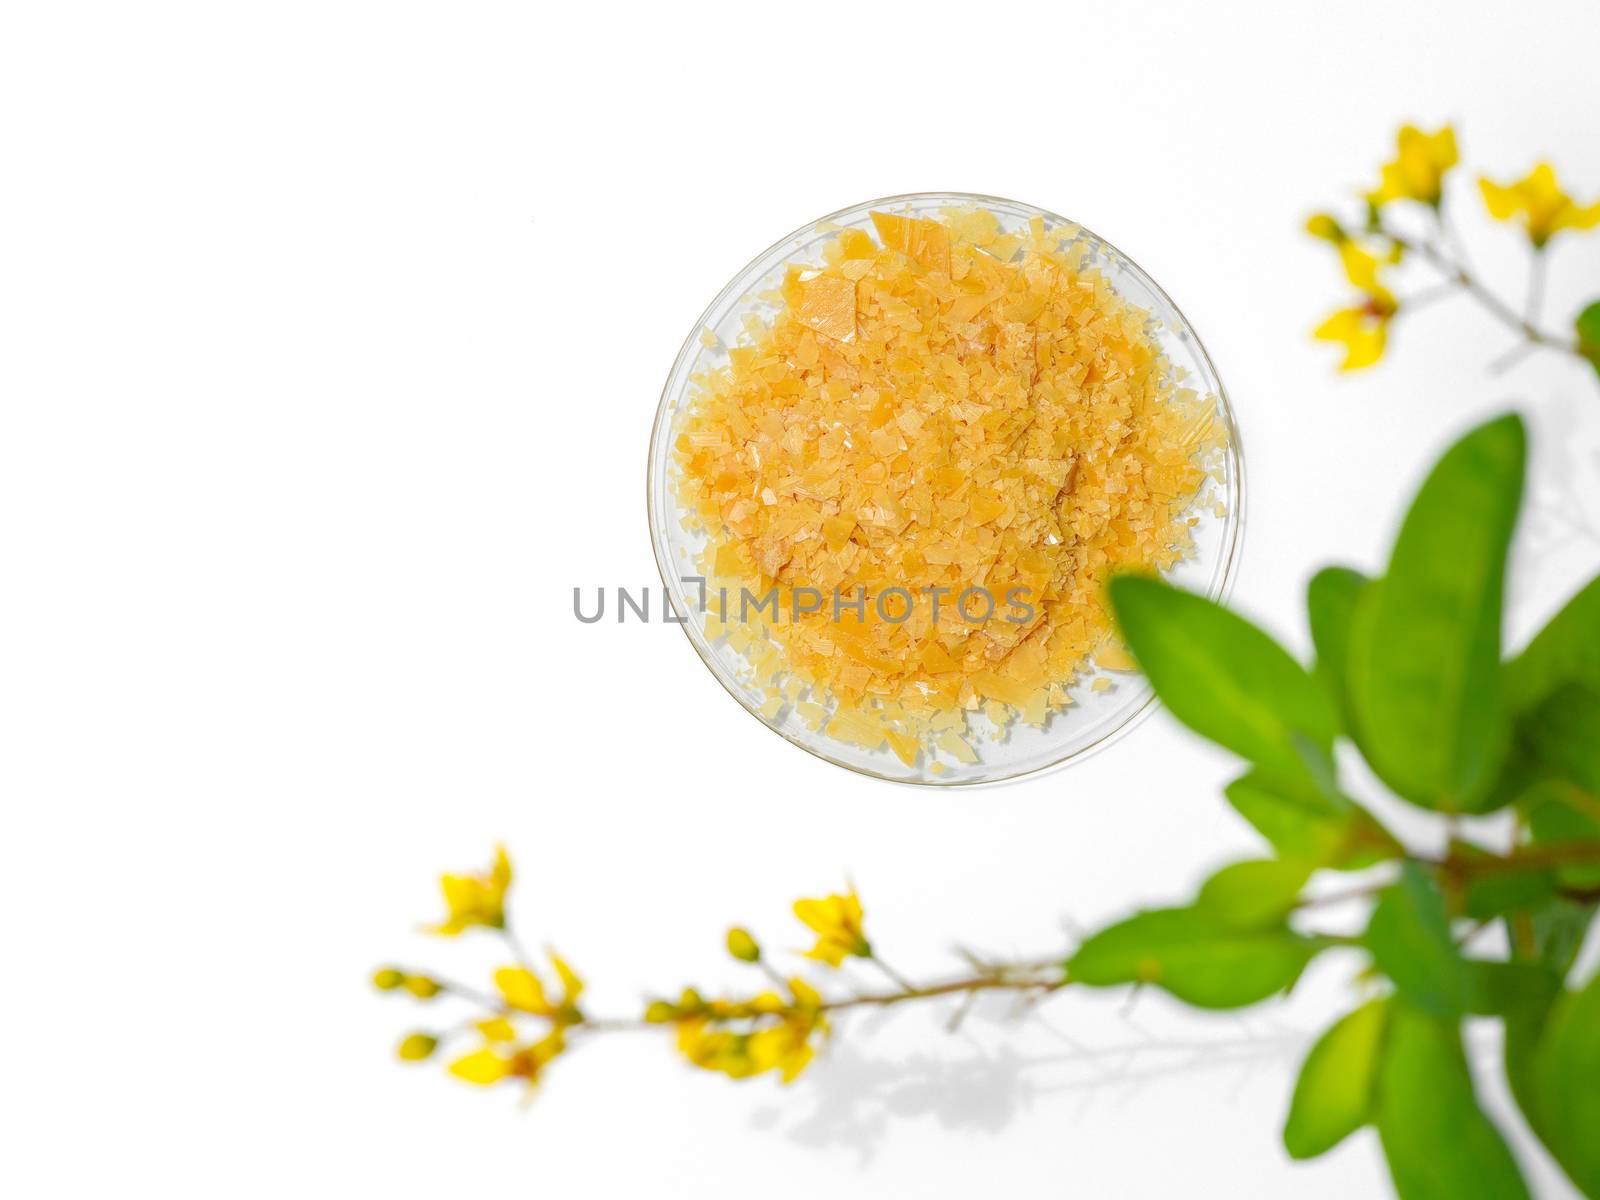 Organic Carnauba Wax comes in the form of hard yellow flakes by chadchai_k